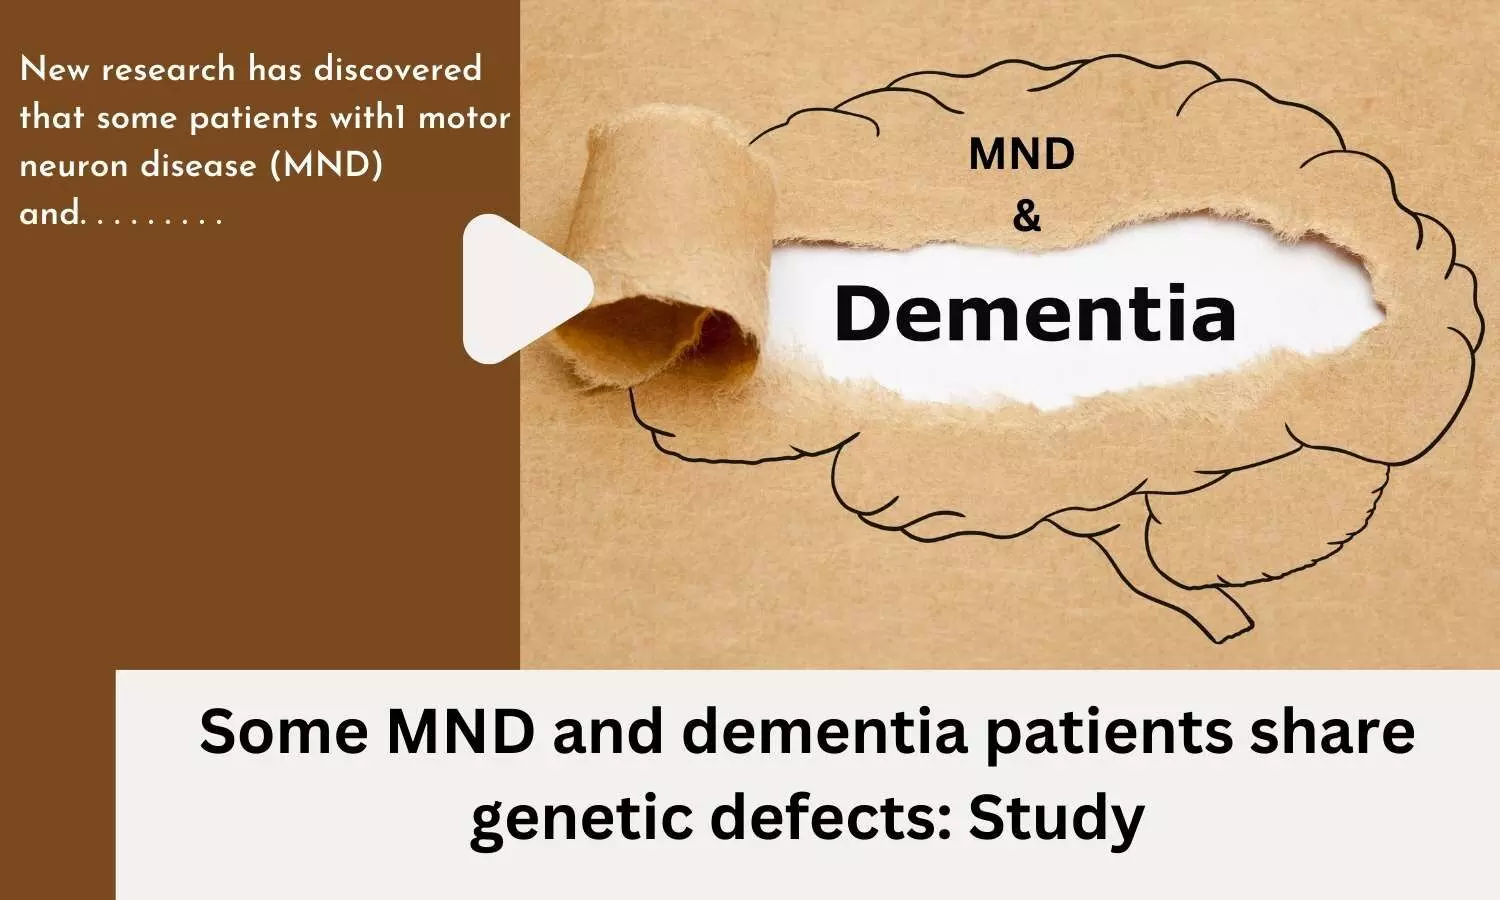 Some MND and dementia patients share genetic defects: Study